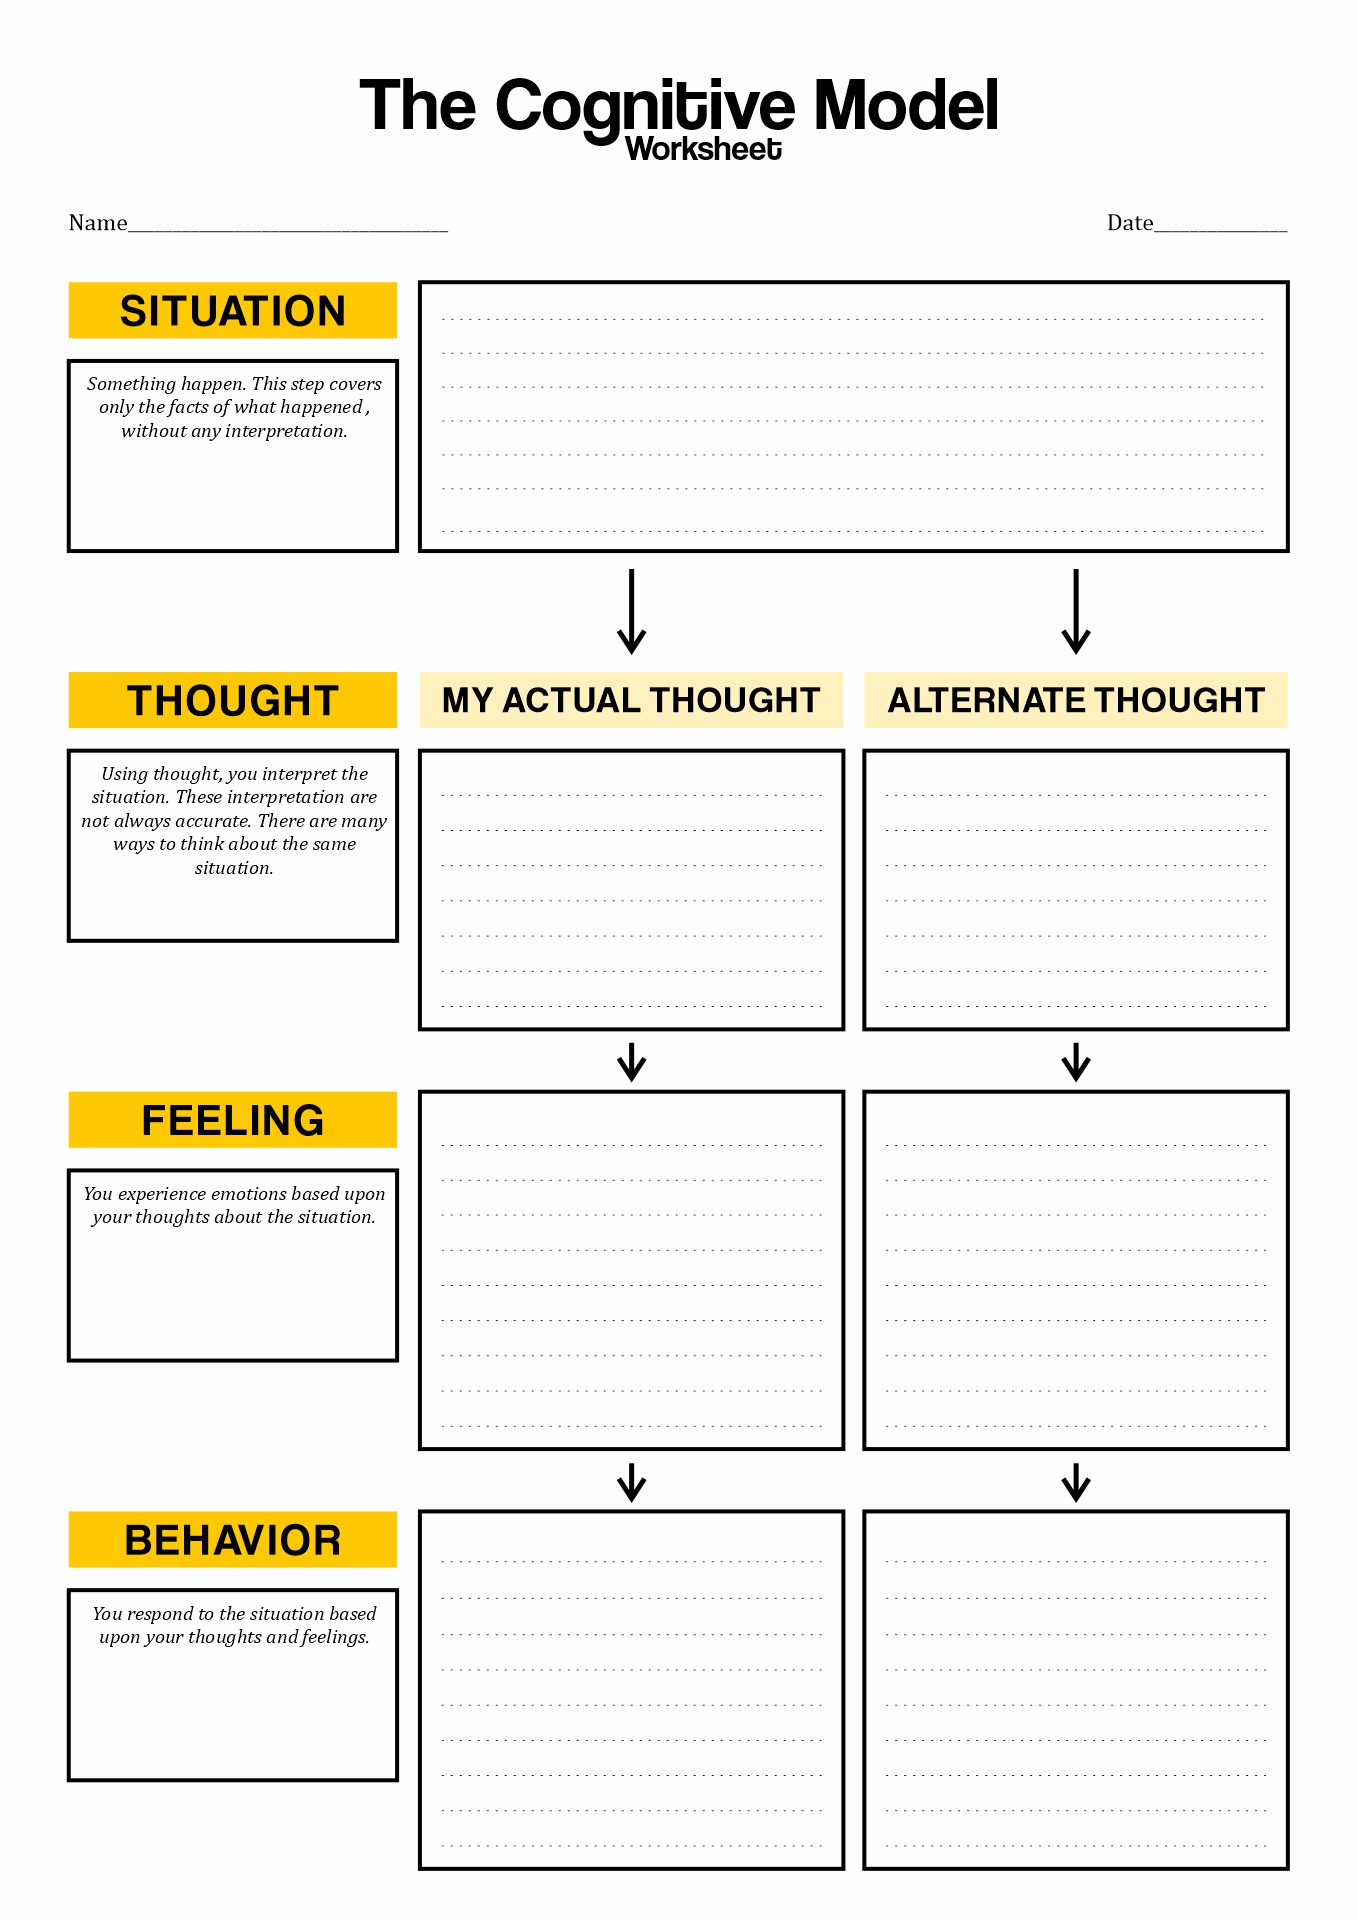 Cognitive Behavioral Therapy Worksheets Image